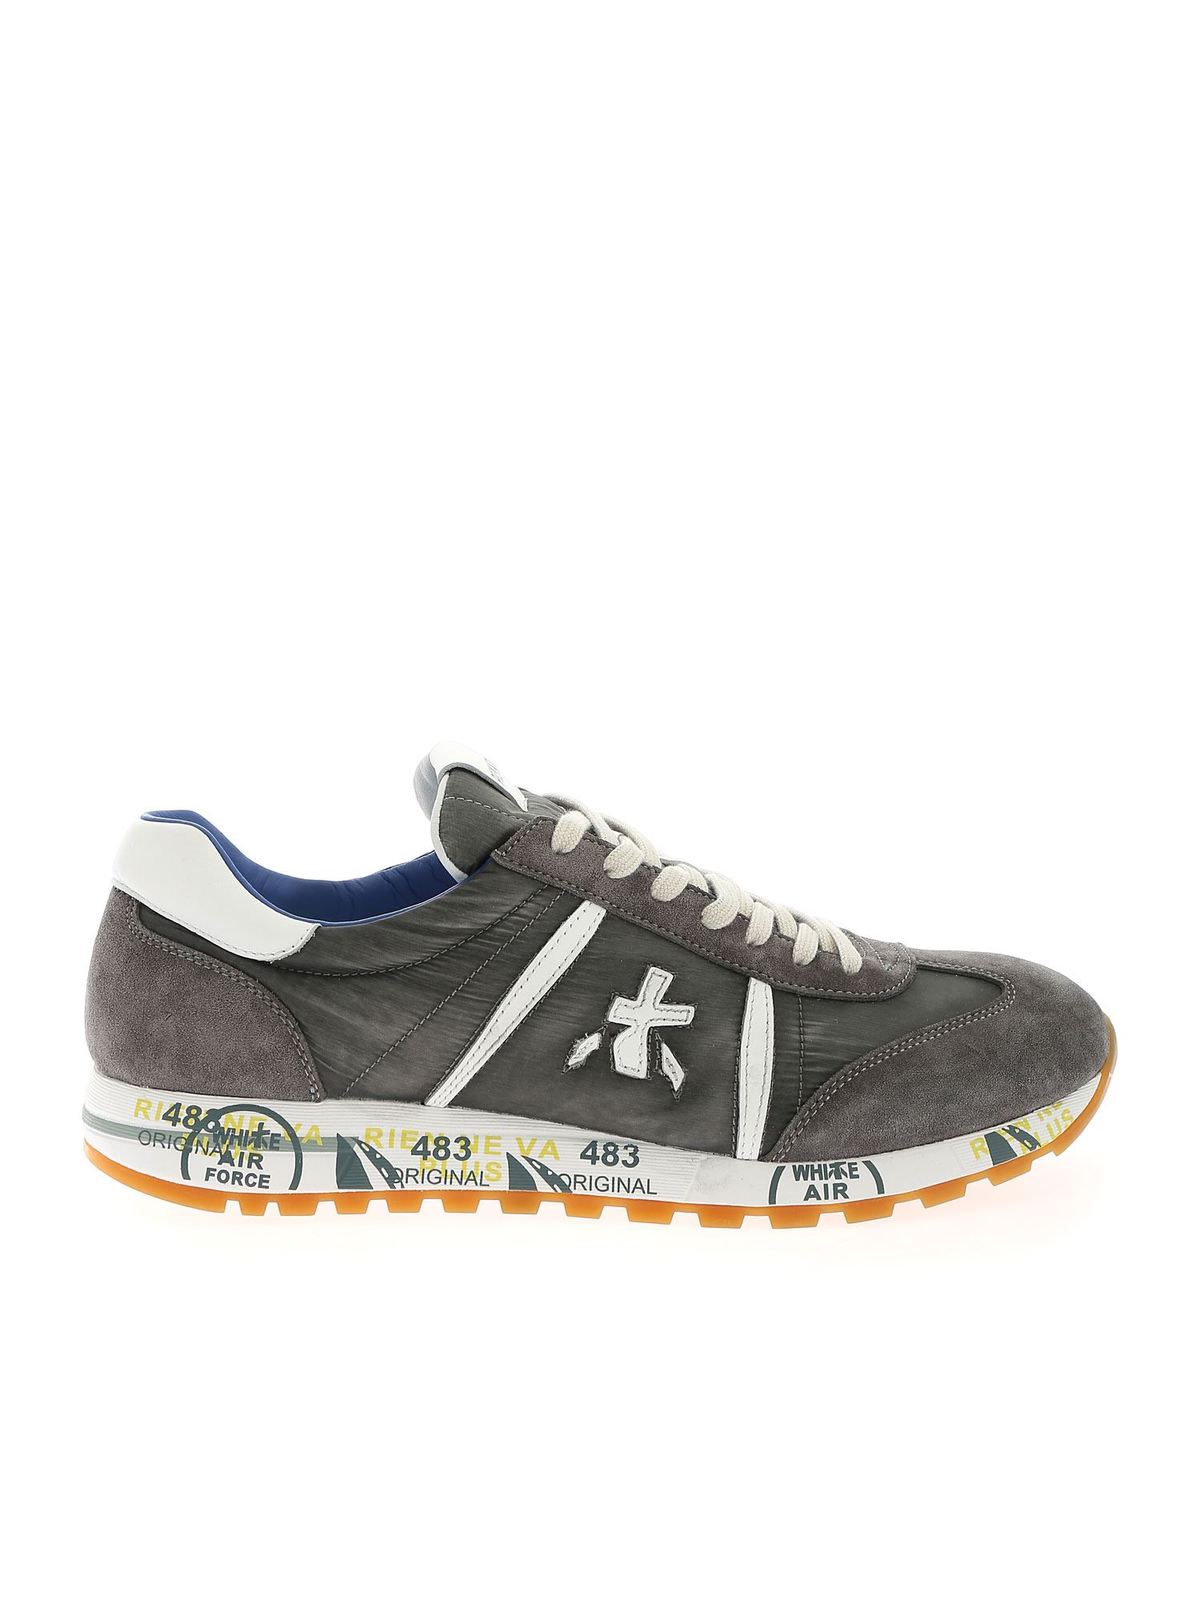 Trainers Premiata - Lucy sneakers in grey - LUCY4575A | iKRIX.com